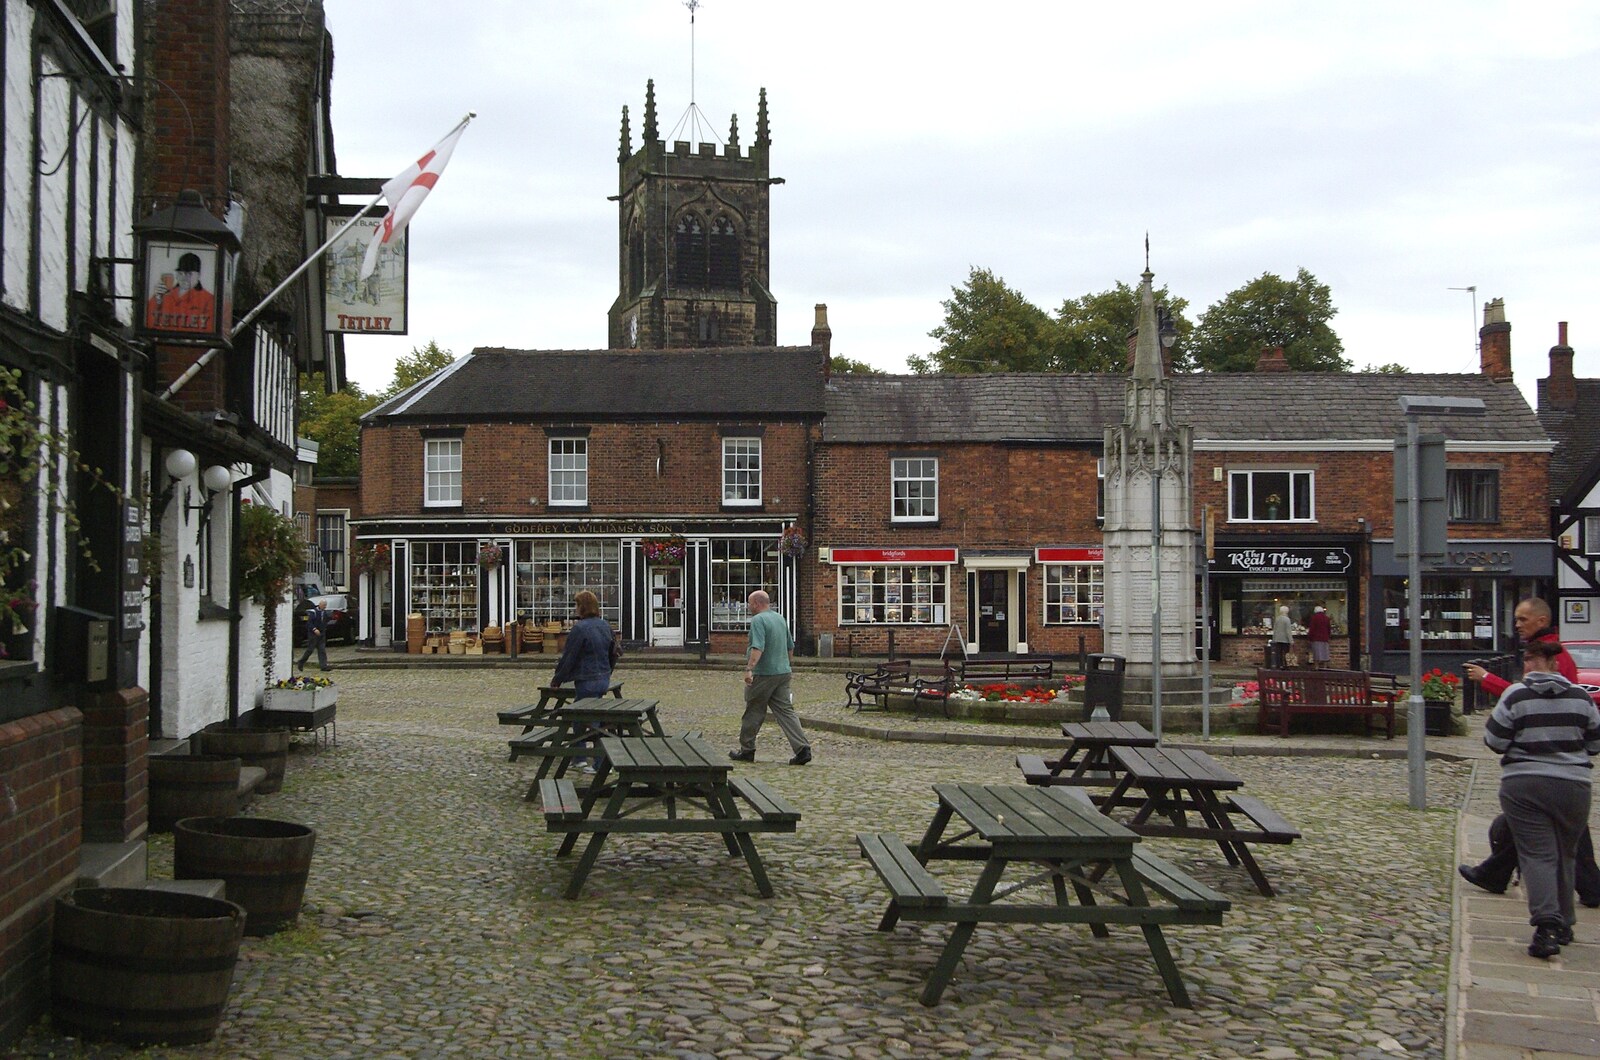 A Road Trip to Ireland Via Sandbach and Conwy, Cheshire and Wales - 21st September 2007: The square outside the Black Bear